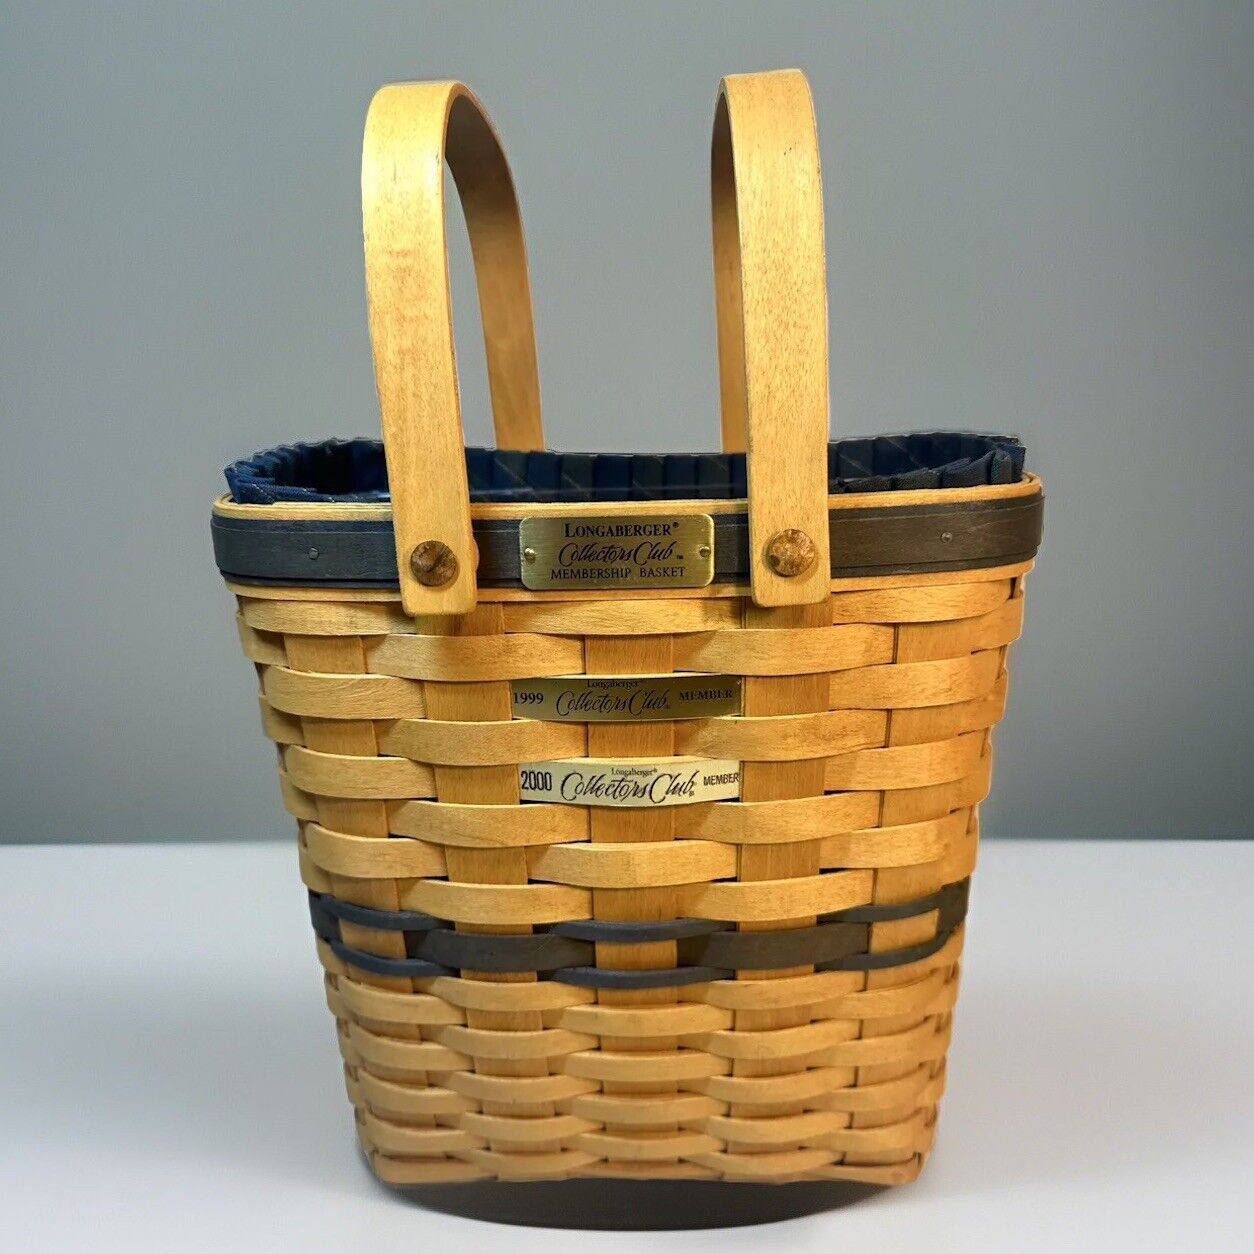 Longaberger Basket Collectors Club w/Fabric Liner & Plastic Protector 90s Signed